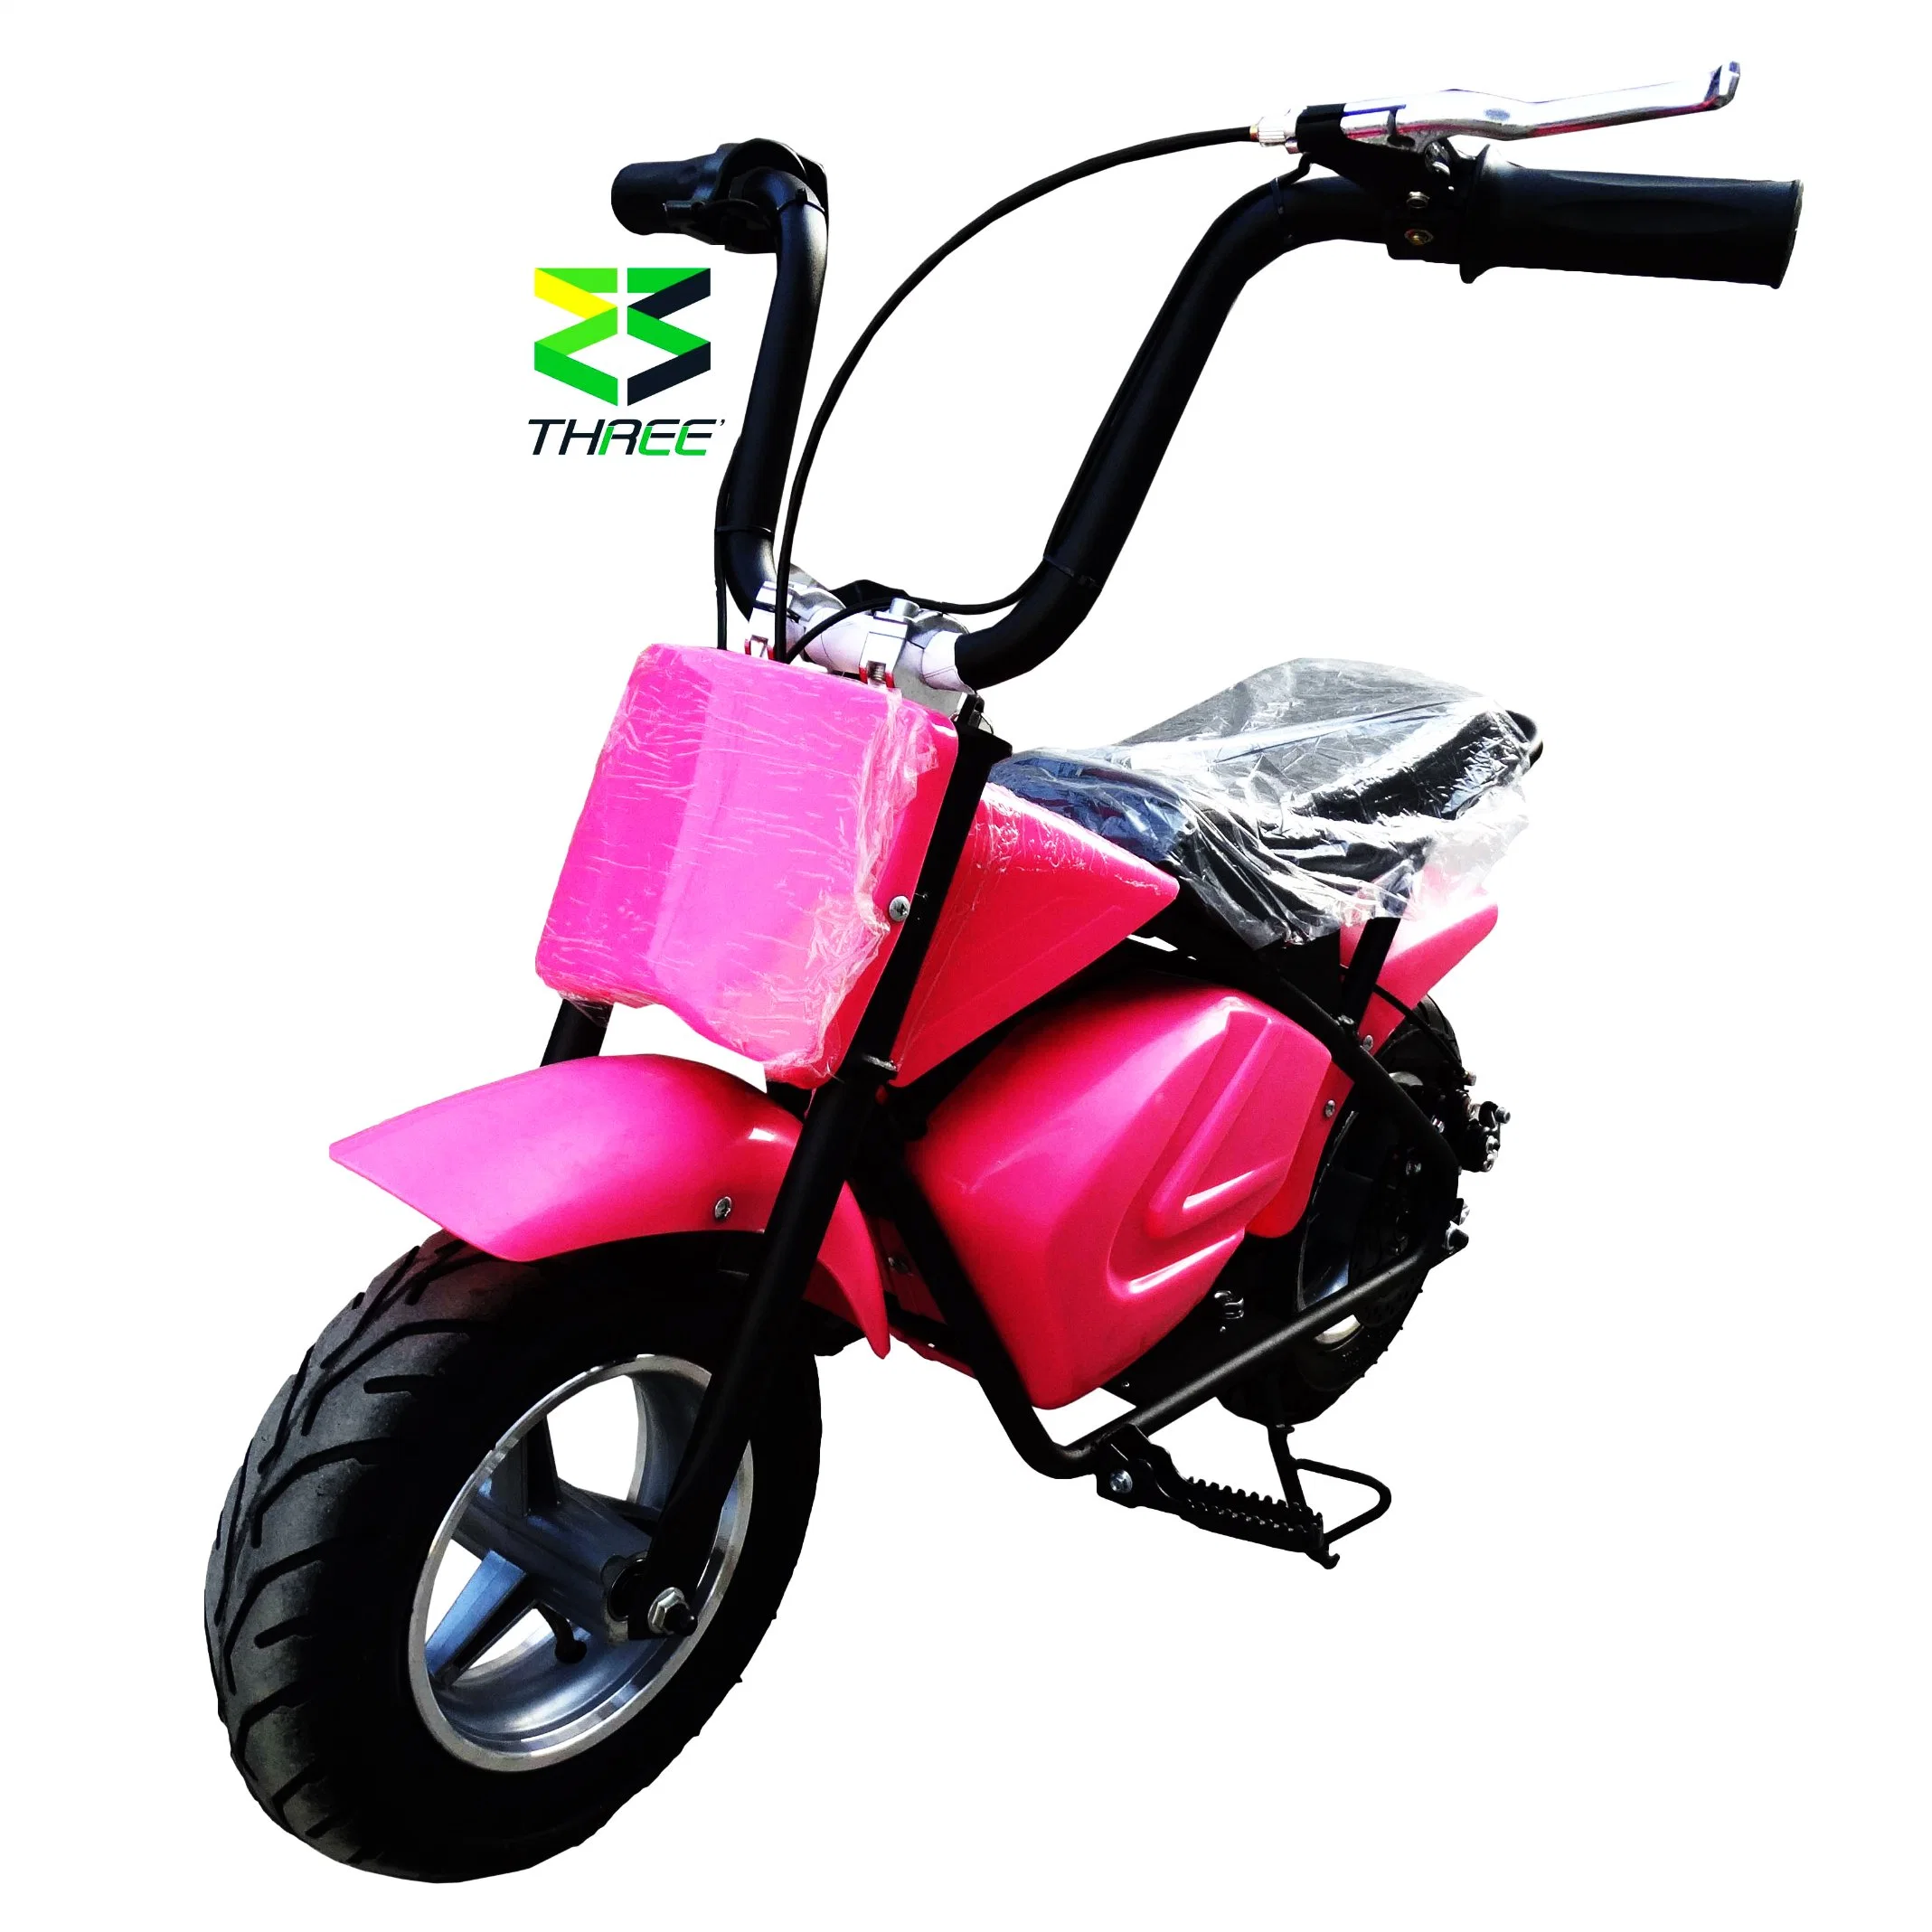 2022 Three Motion 250W 24V Electric Mini Pit Bike Electric Motorcycle Scooter for Sale